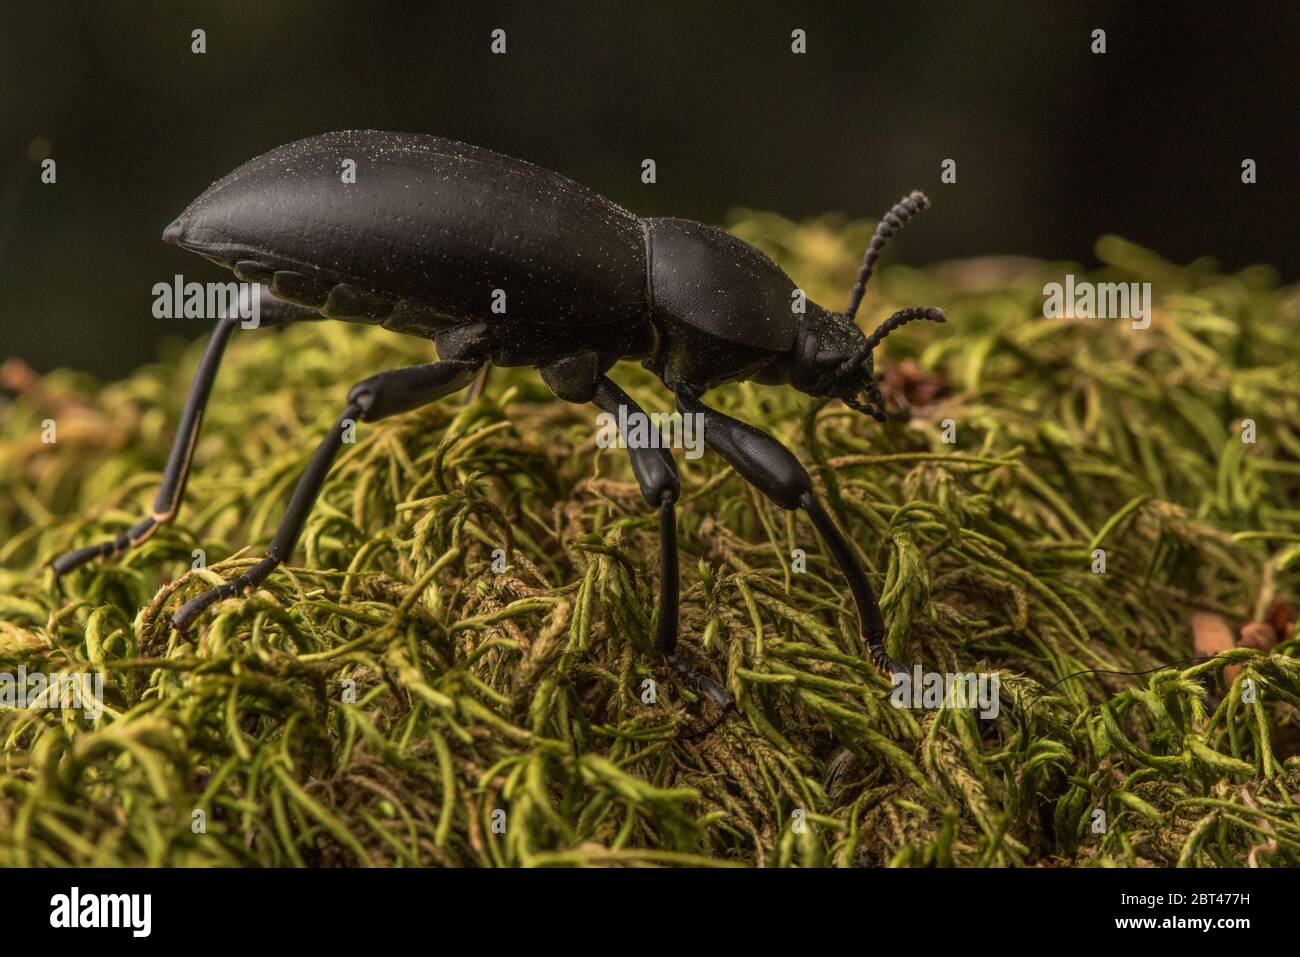 A black stink beetle, Eleodes, from the Bay area of California, USA. Stock Photo